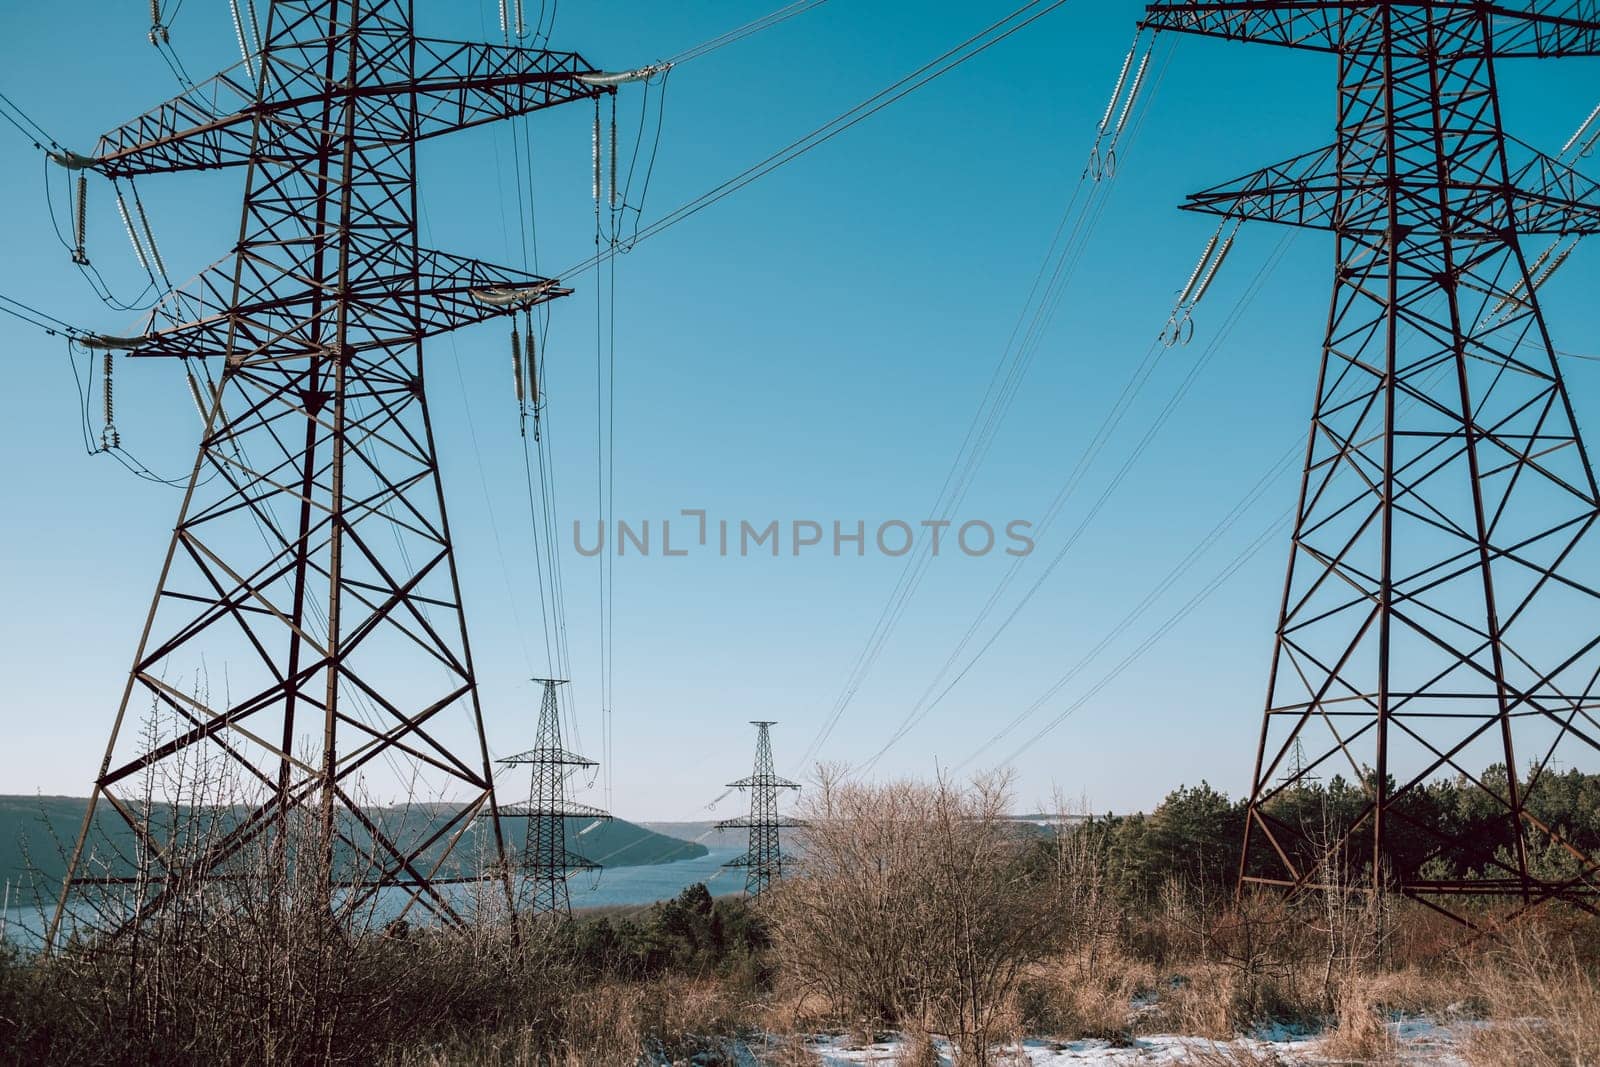 Electric voltage towers, transmission power lines, electricity pylons at sunny sky background. Renewable green energy and clean ecological environment. High quality photo